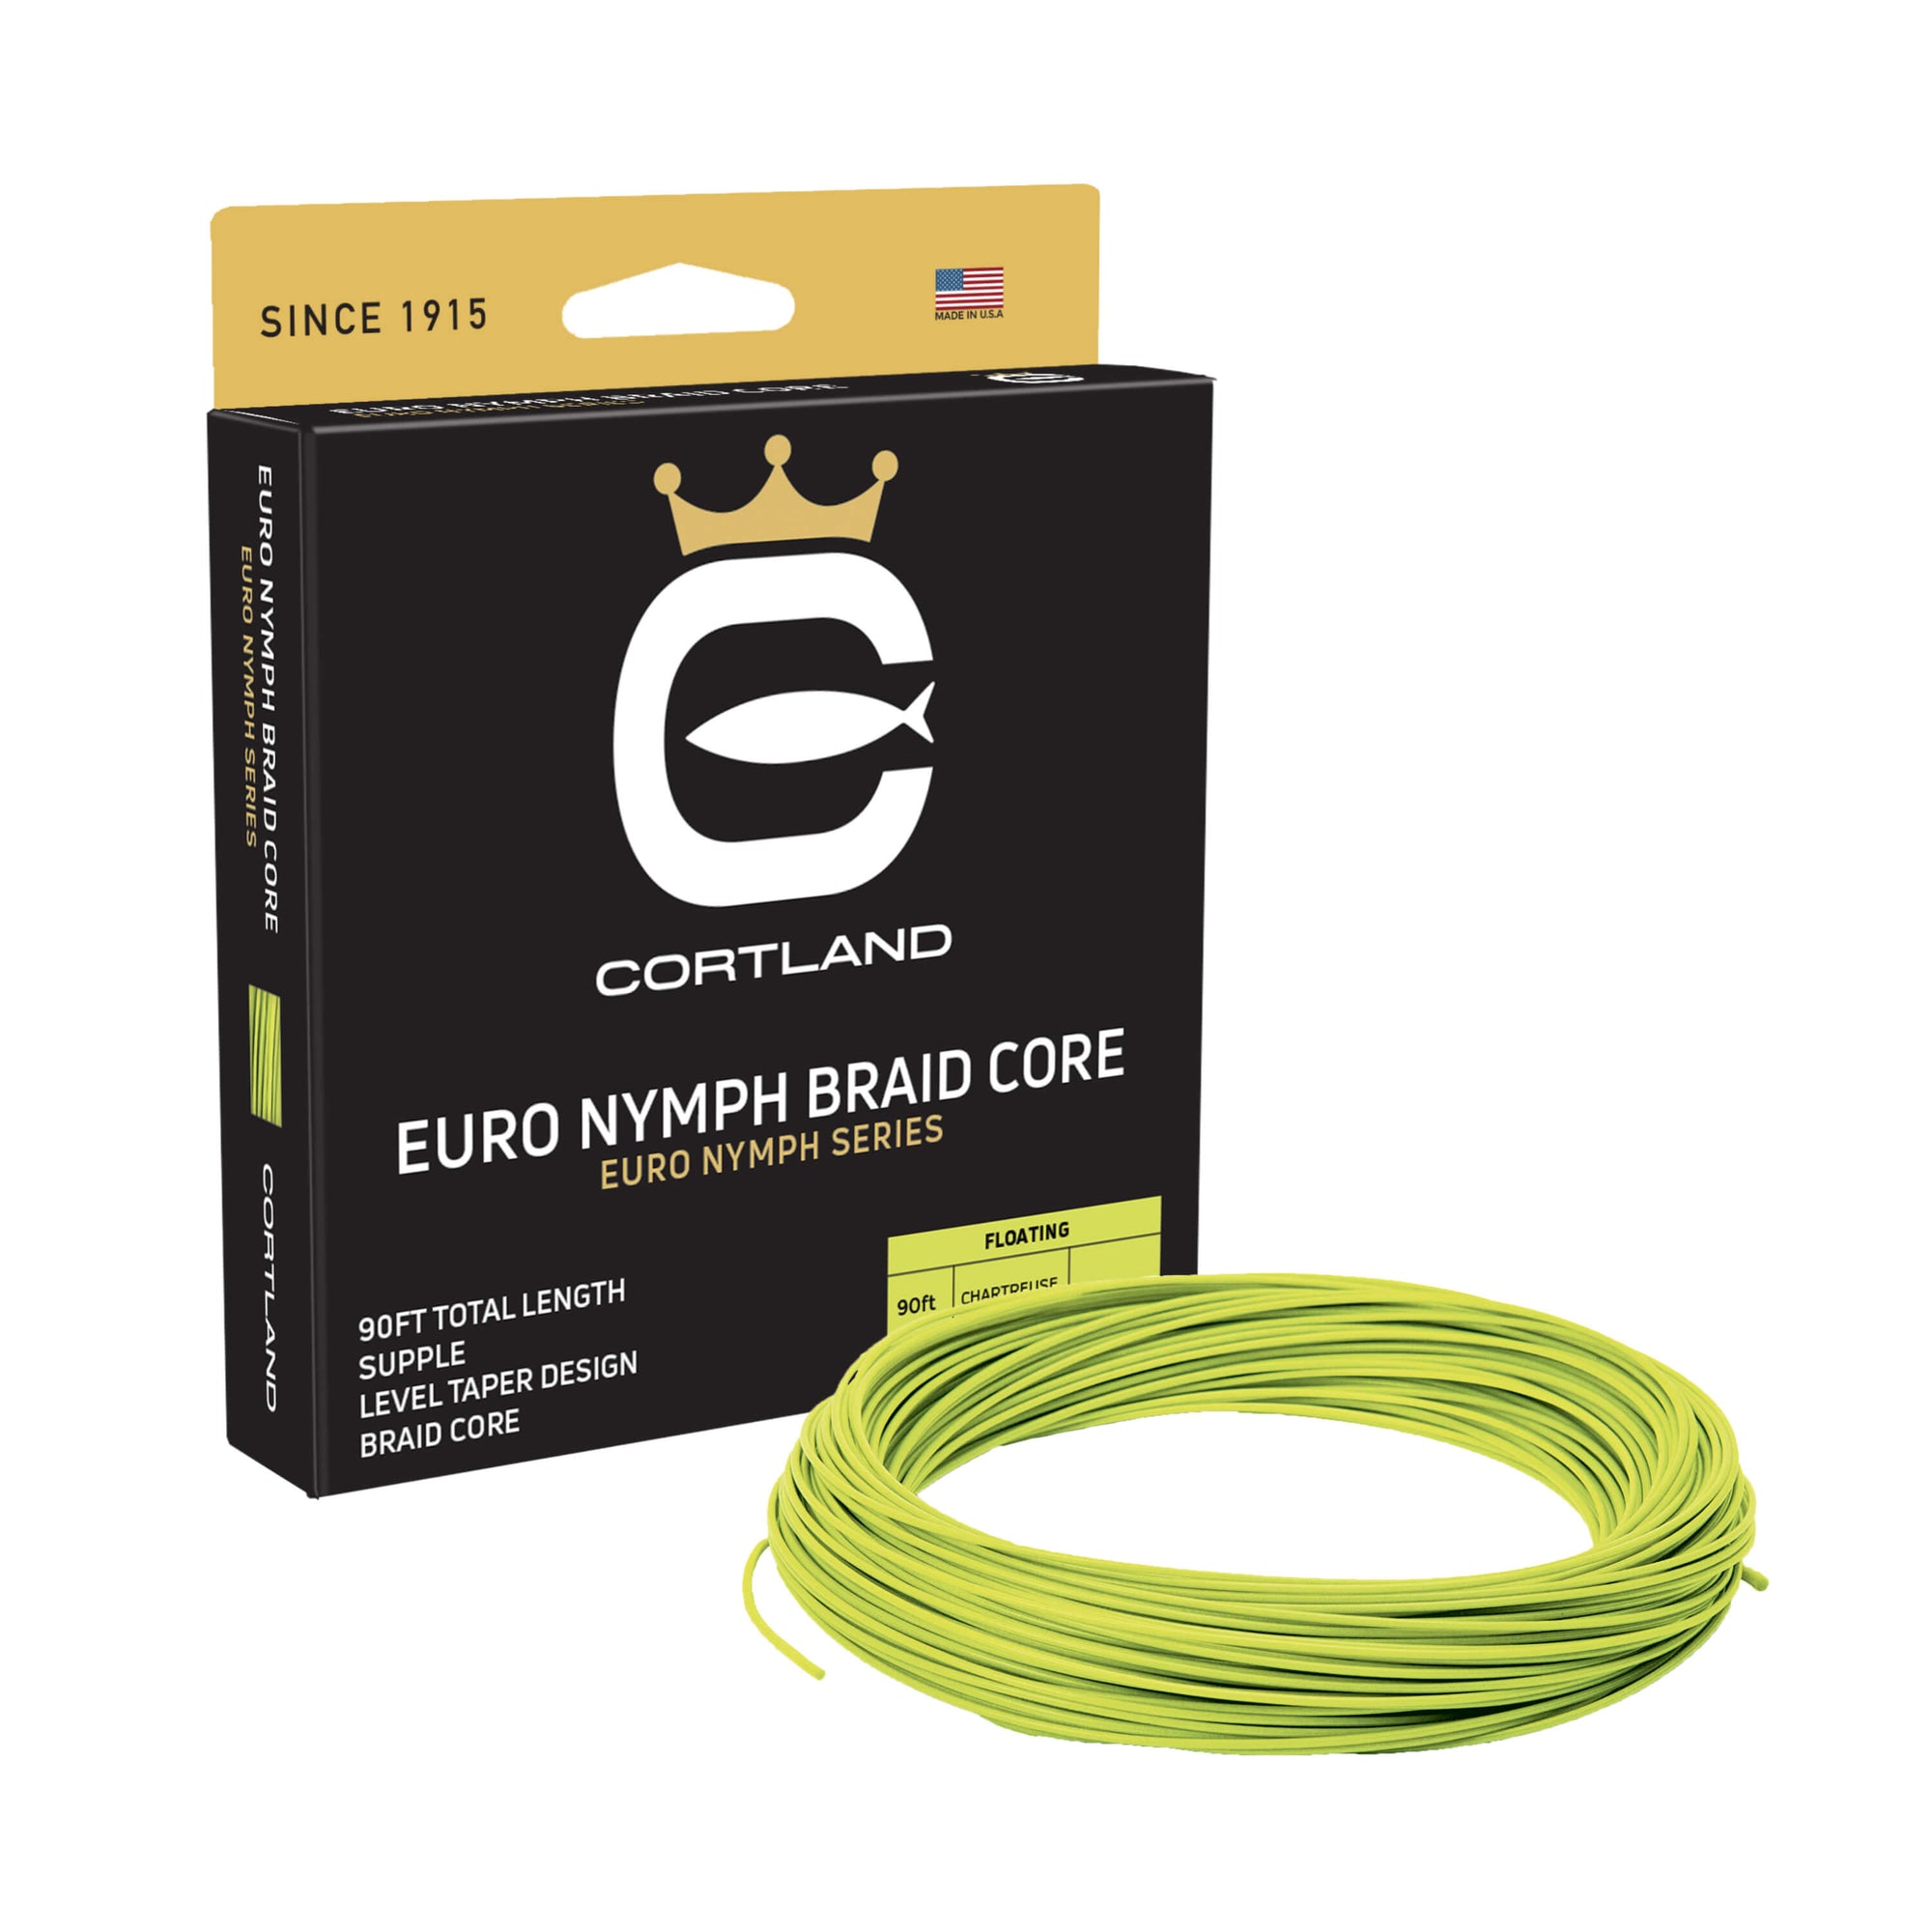 Euro Nymph Braid Core Fly Line Box and coil. The coil is chartreuse and the box is black and bronze with the Cortland Logo.